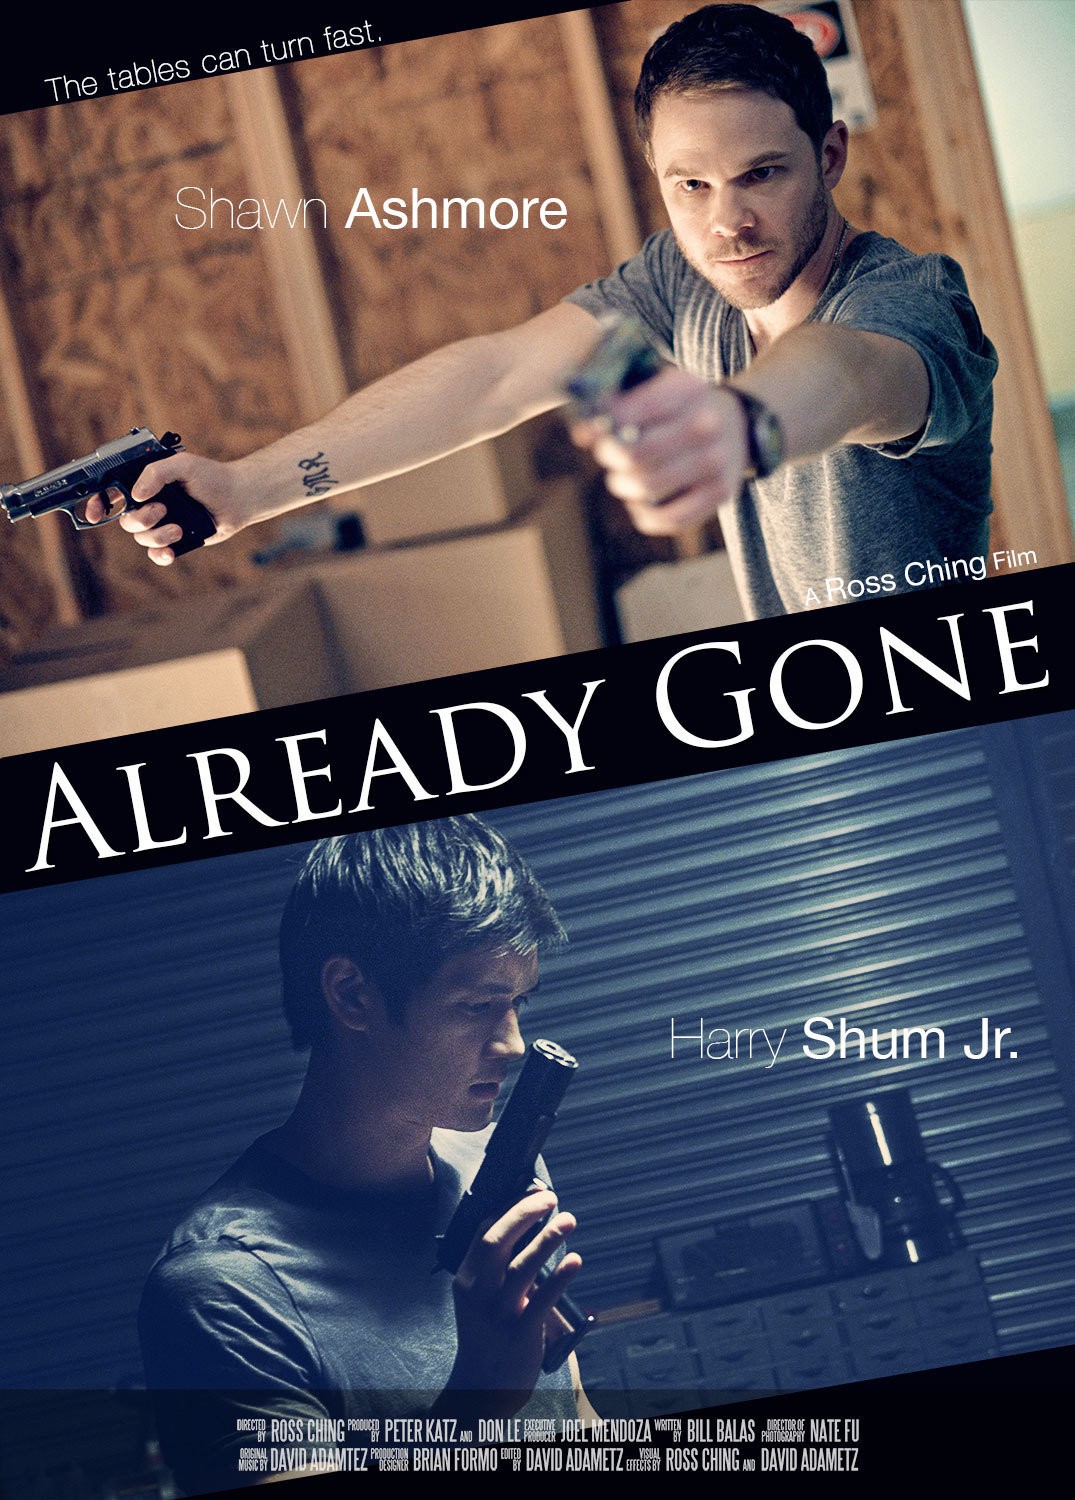 Extra Large Movie Poster Image for Already Gone